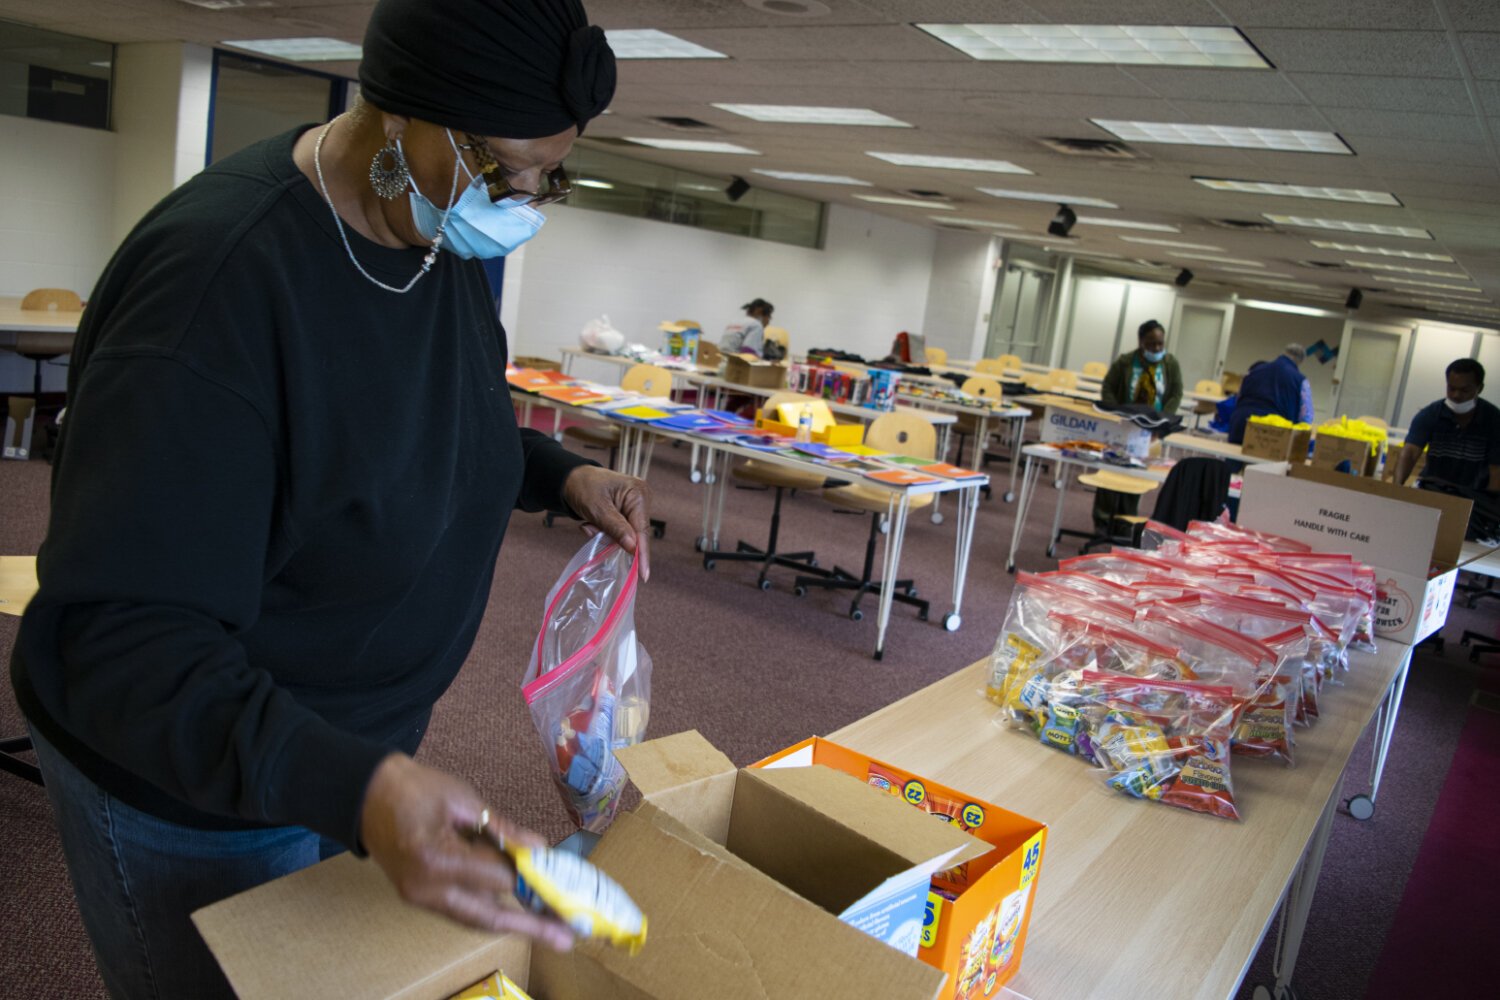 Eartha Logan, a member of Flint Residents for Good puts together goodie bags for Flint's special education children.